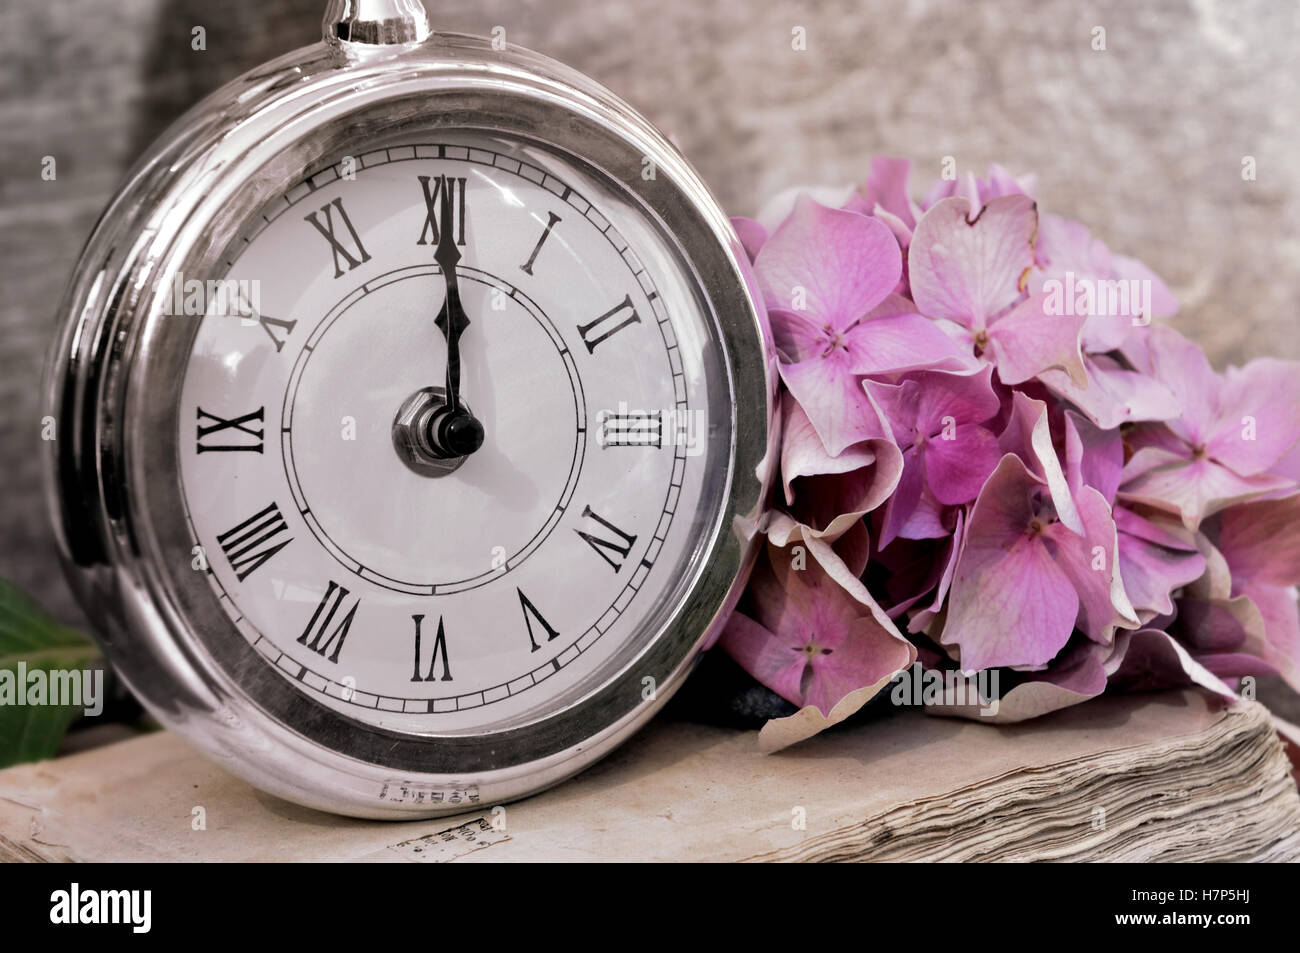 retro clock showing midnight in rustic background Stock Photo